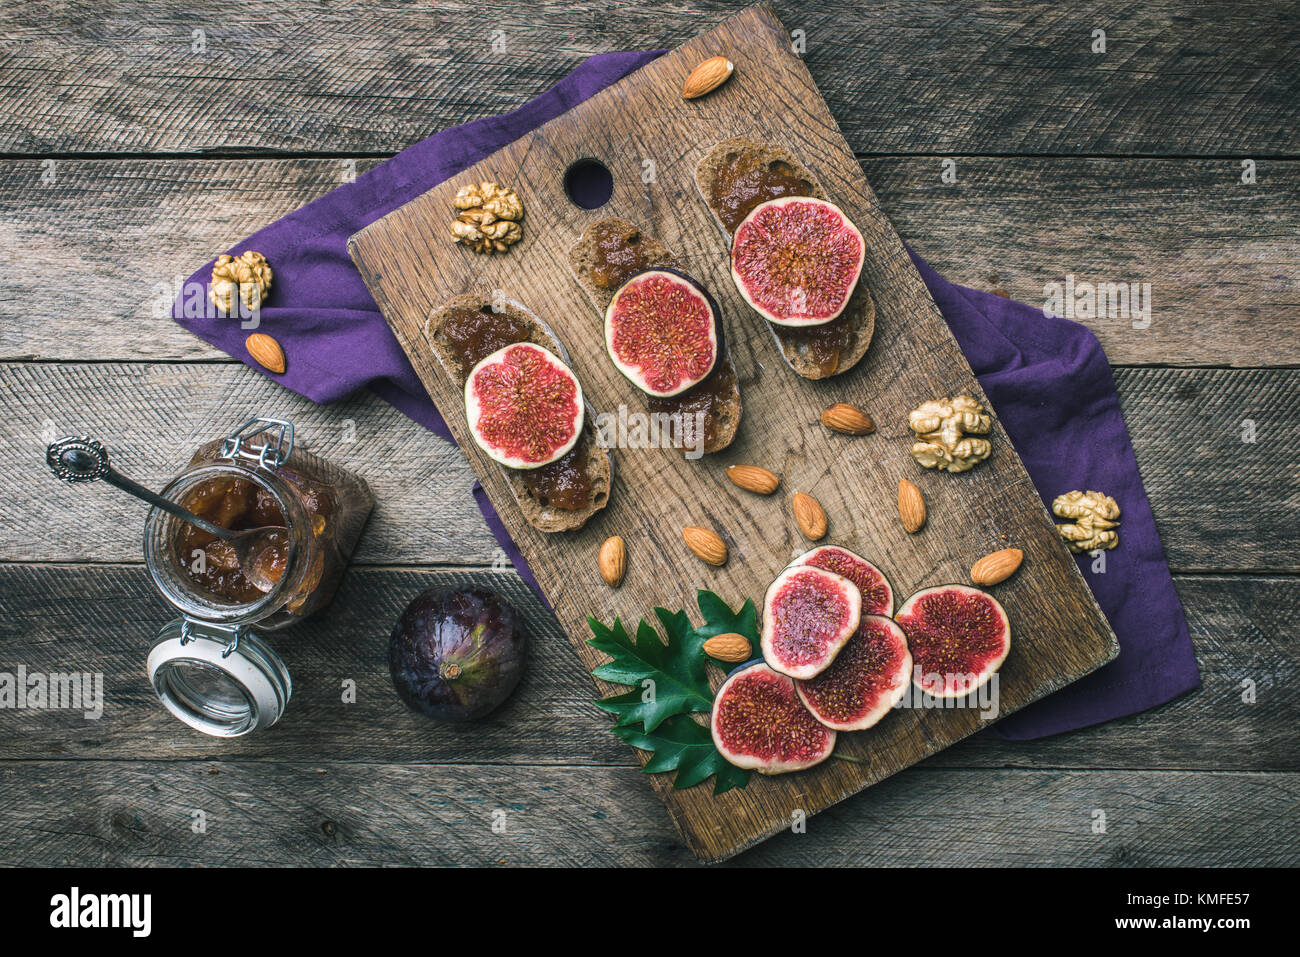 Sliced figs, nuts and bread with jam on wooden choppingboard in rustic style. Autumn season food photo Stock Photo